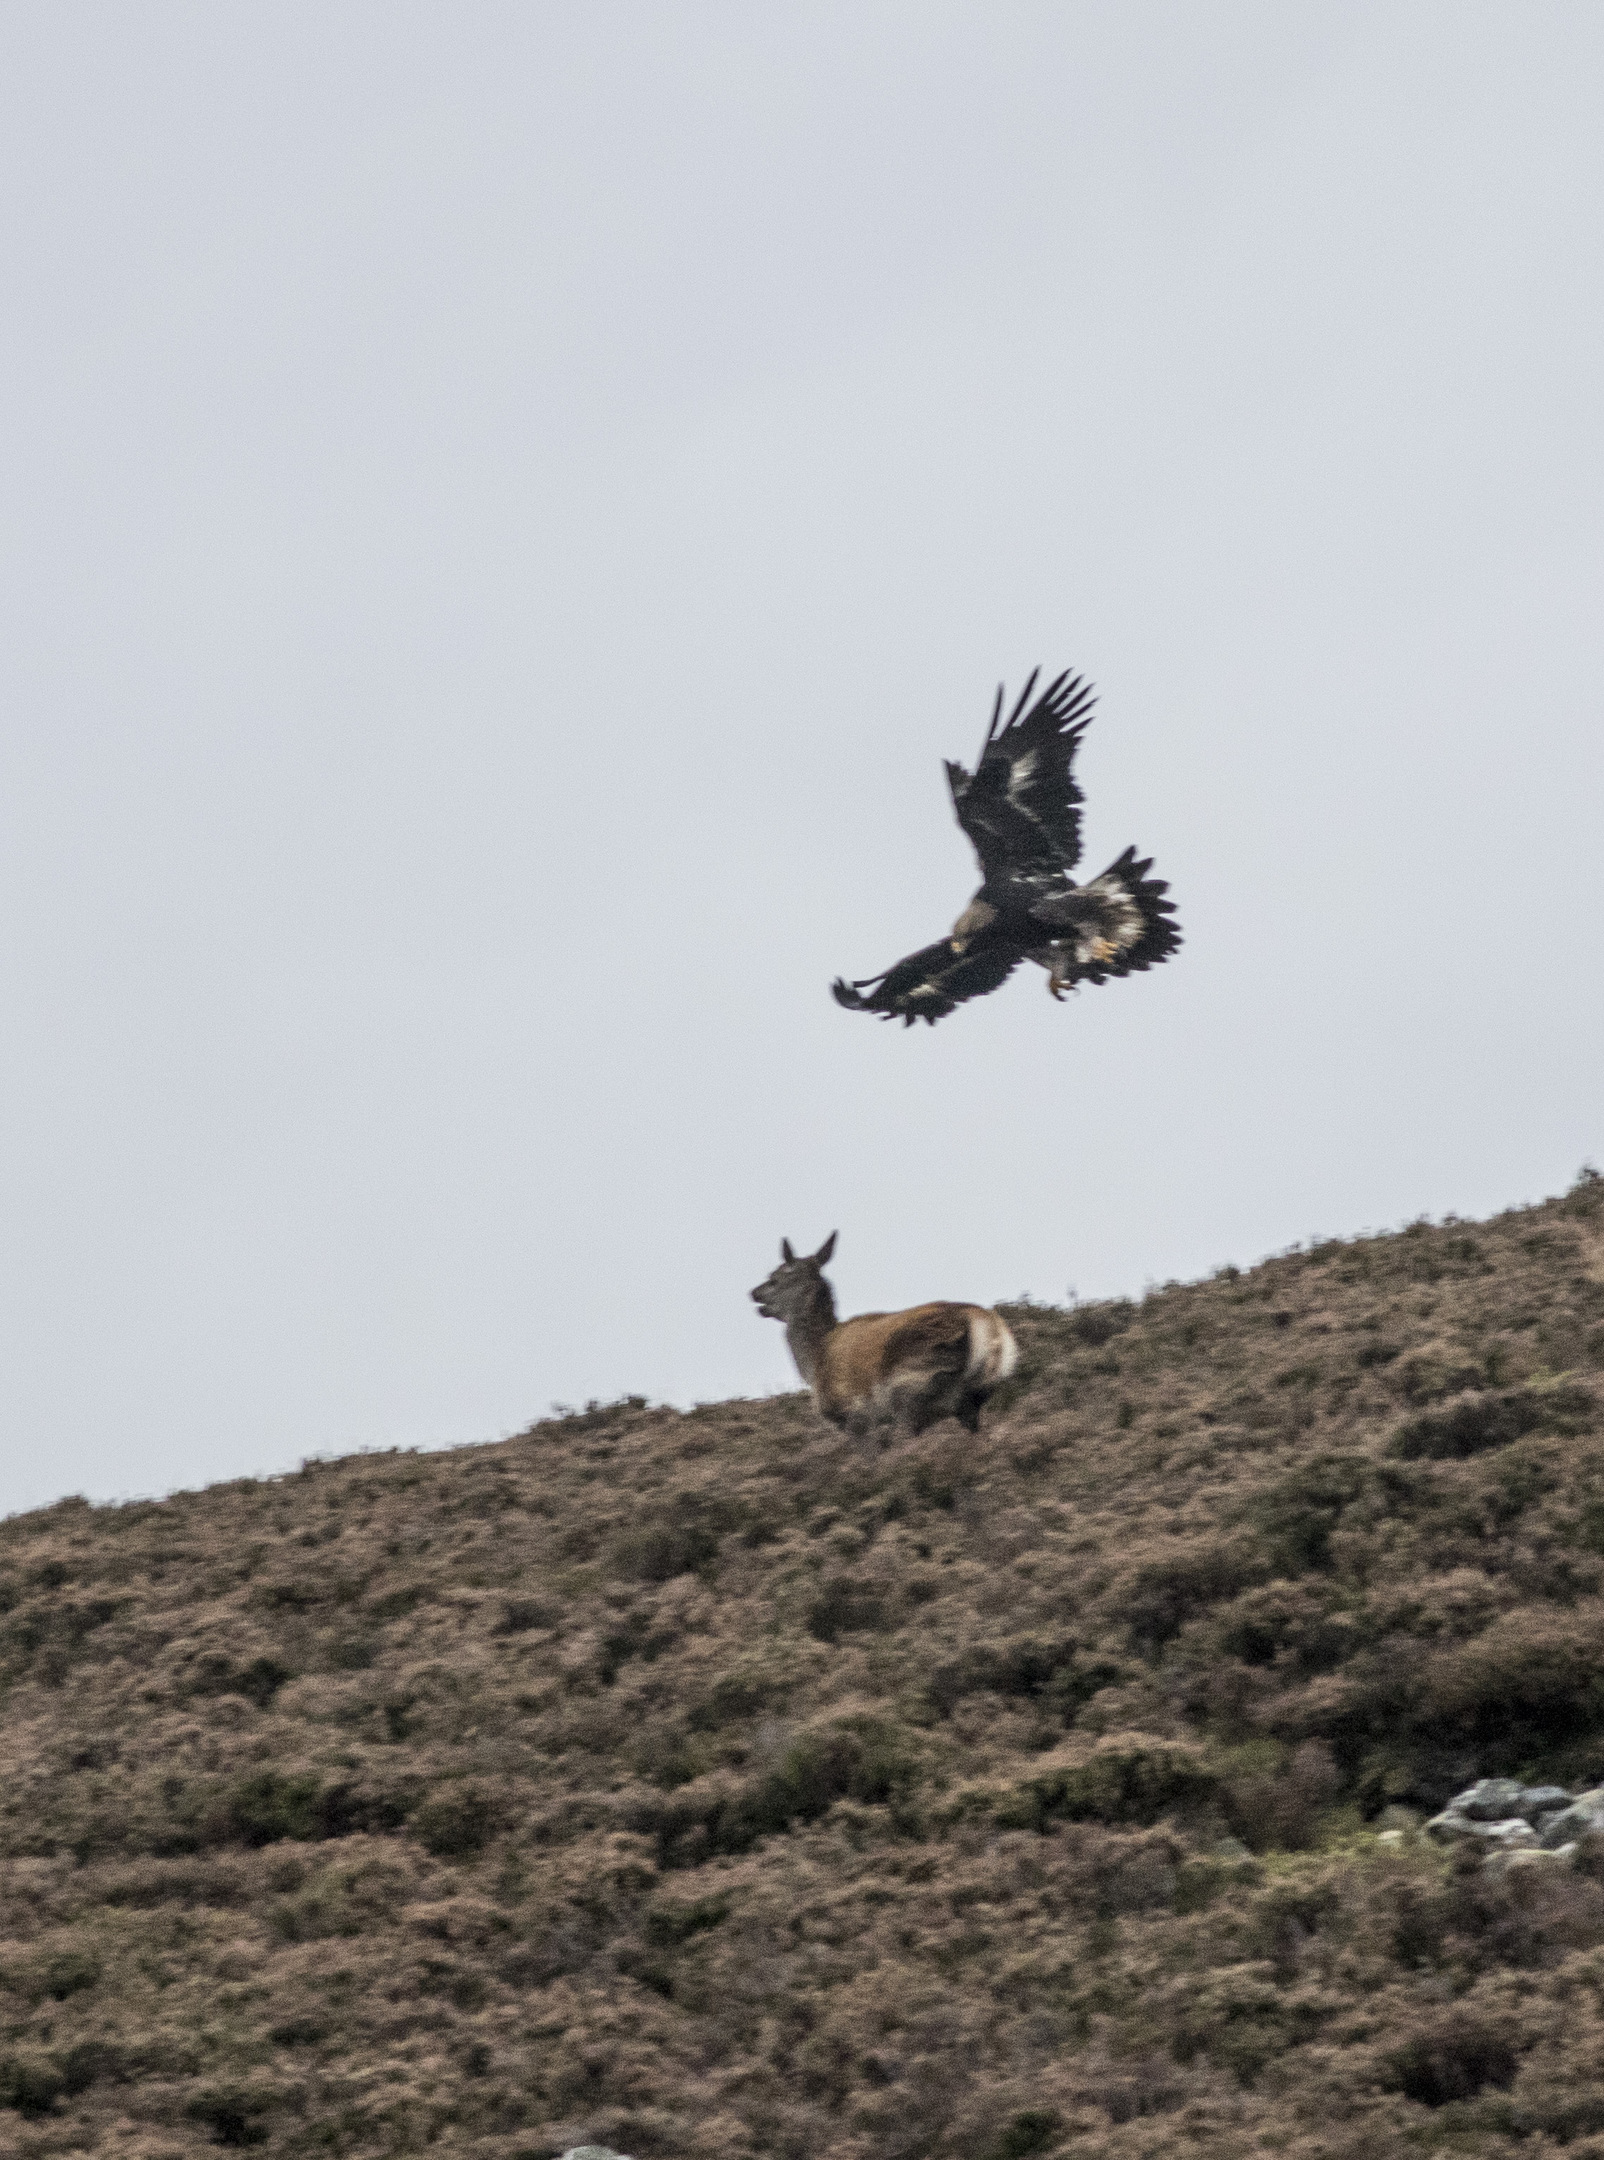 Spectacular Images Capture Moment Golden Eagle Swooped On